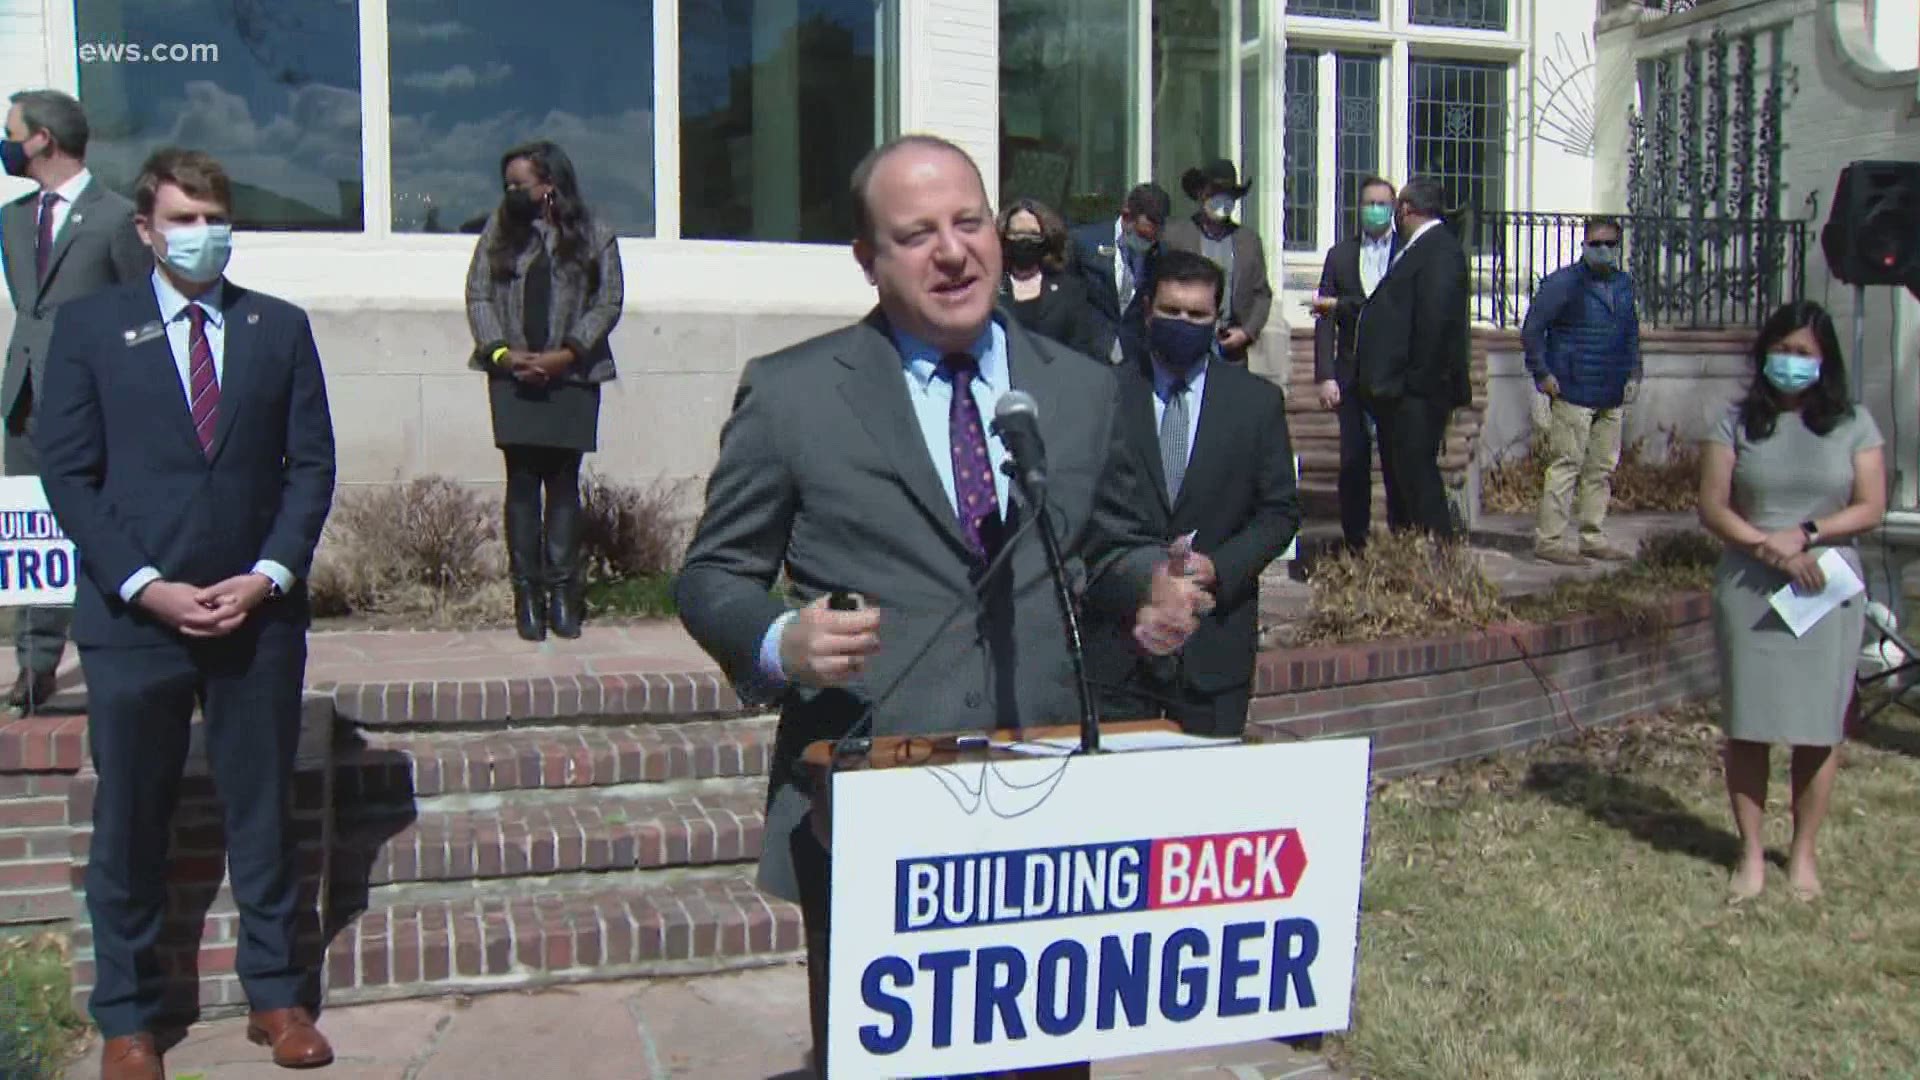 Governor Jared Polis said the goal is to help Colorado recover faster.